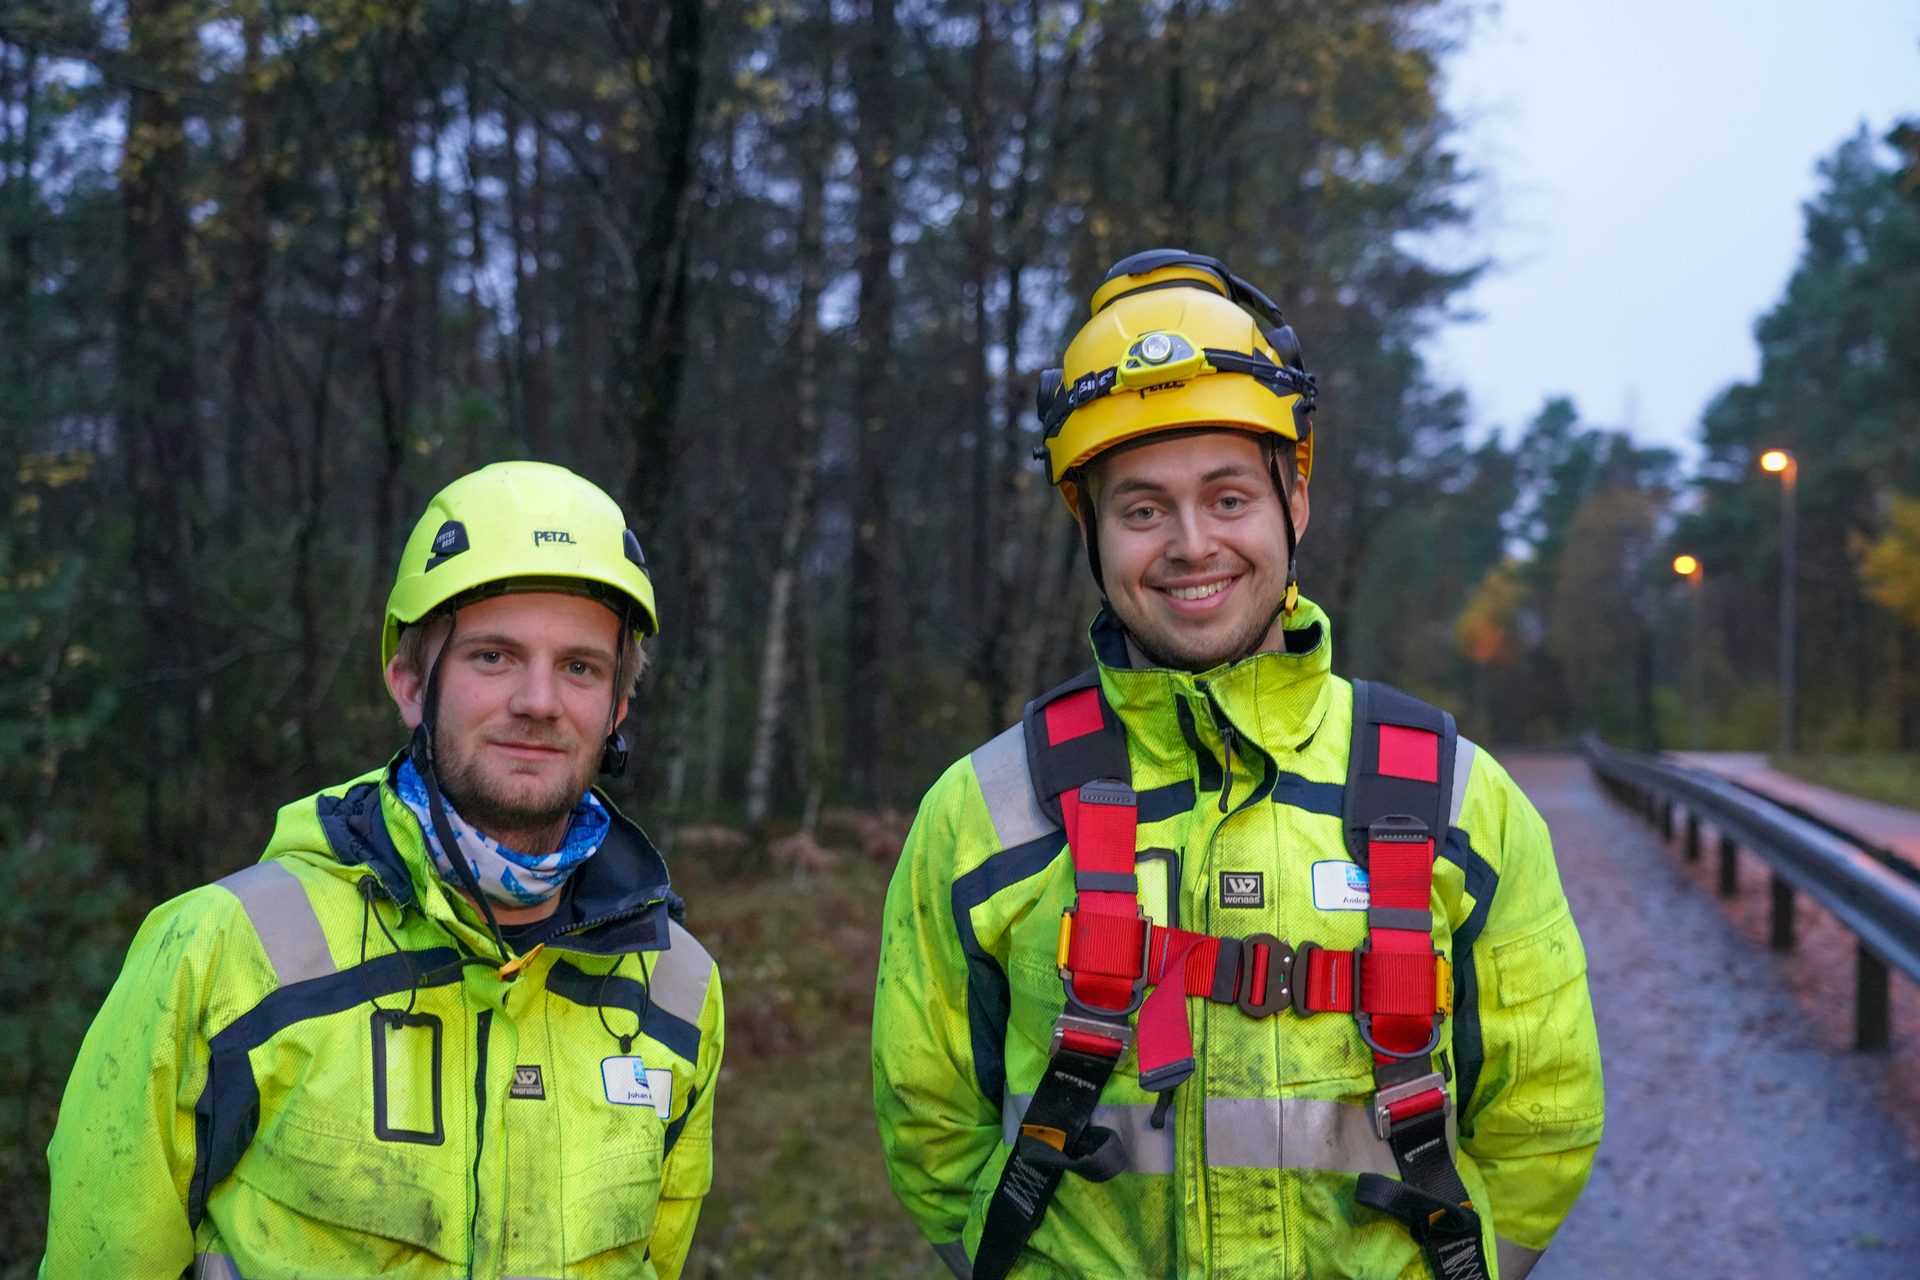 Hard hat, High-visibility clothing, Head, Helmet, Smile, Outerwear, Plant, Workwear, Tree, Sleeve